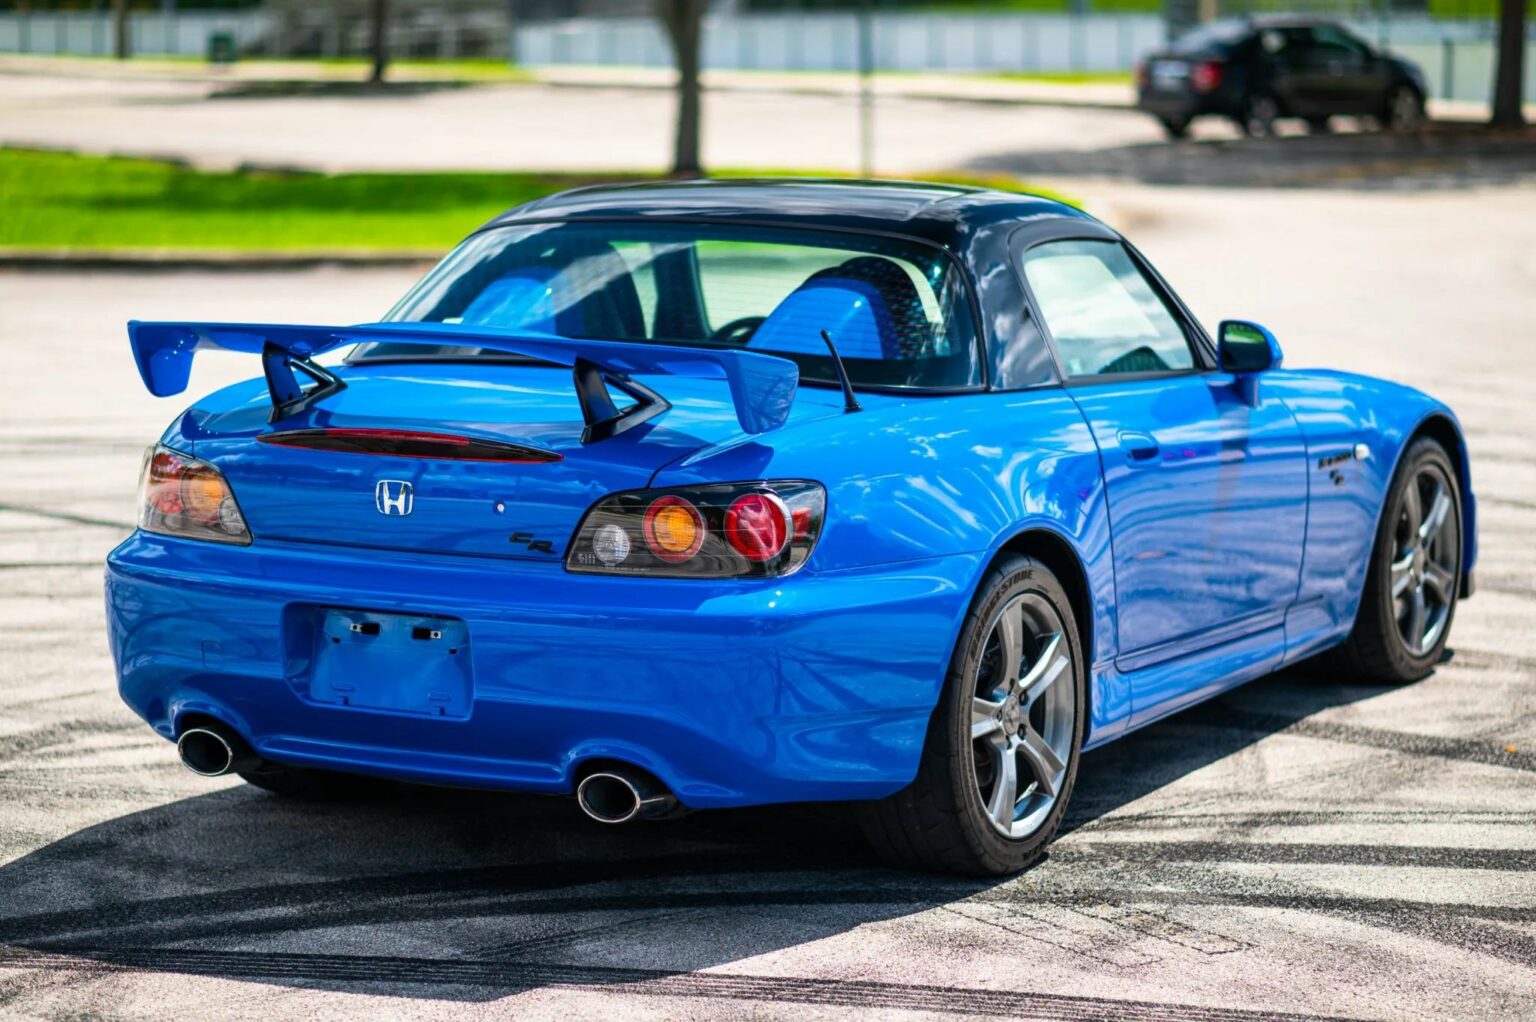 A 2008 Honda S2000 CR Sold For $125,000 Making It The Second Most ...